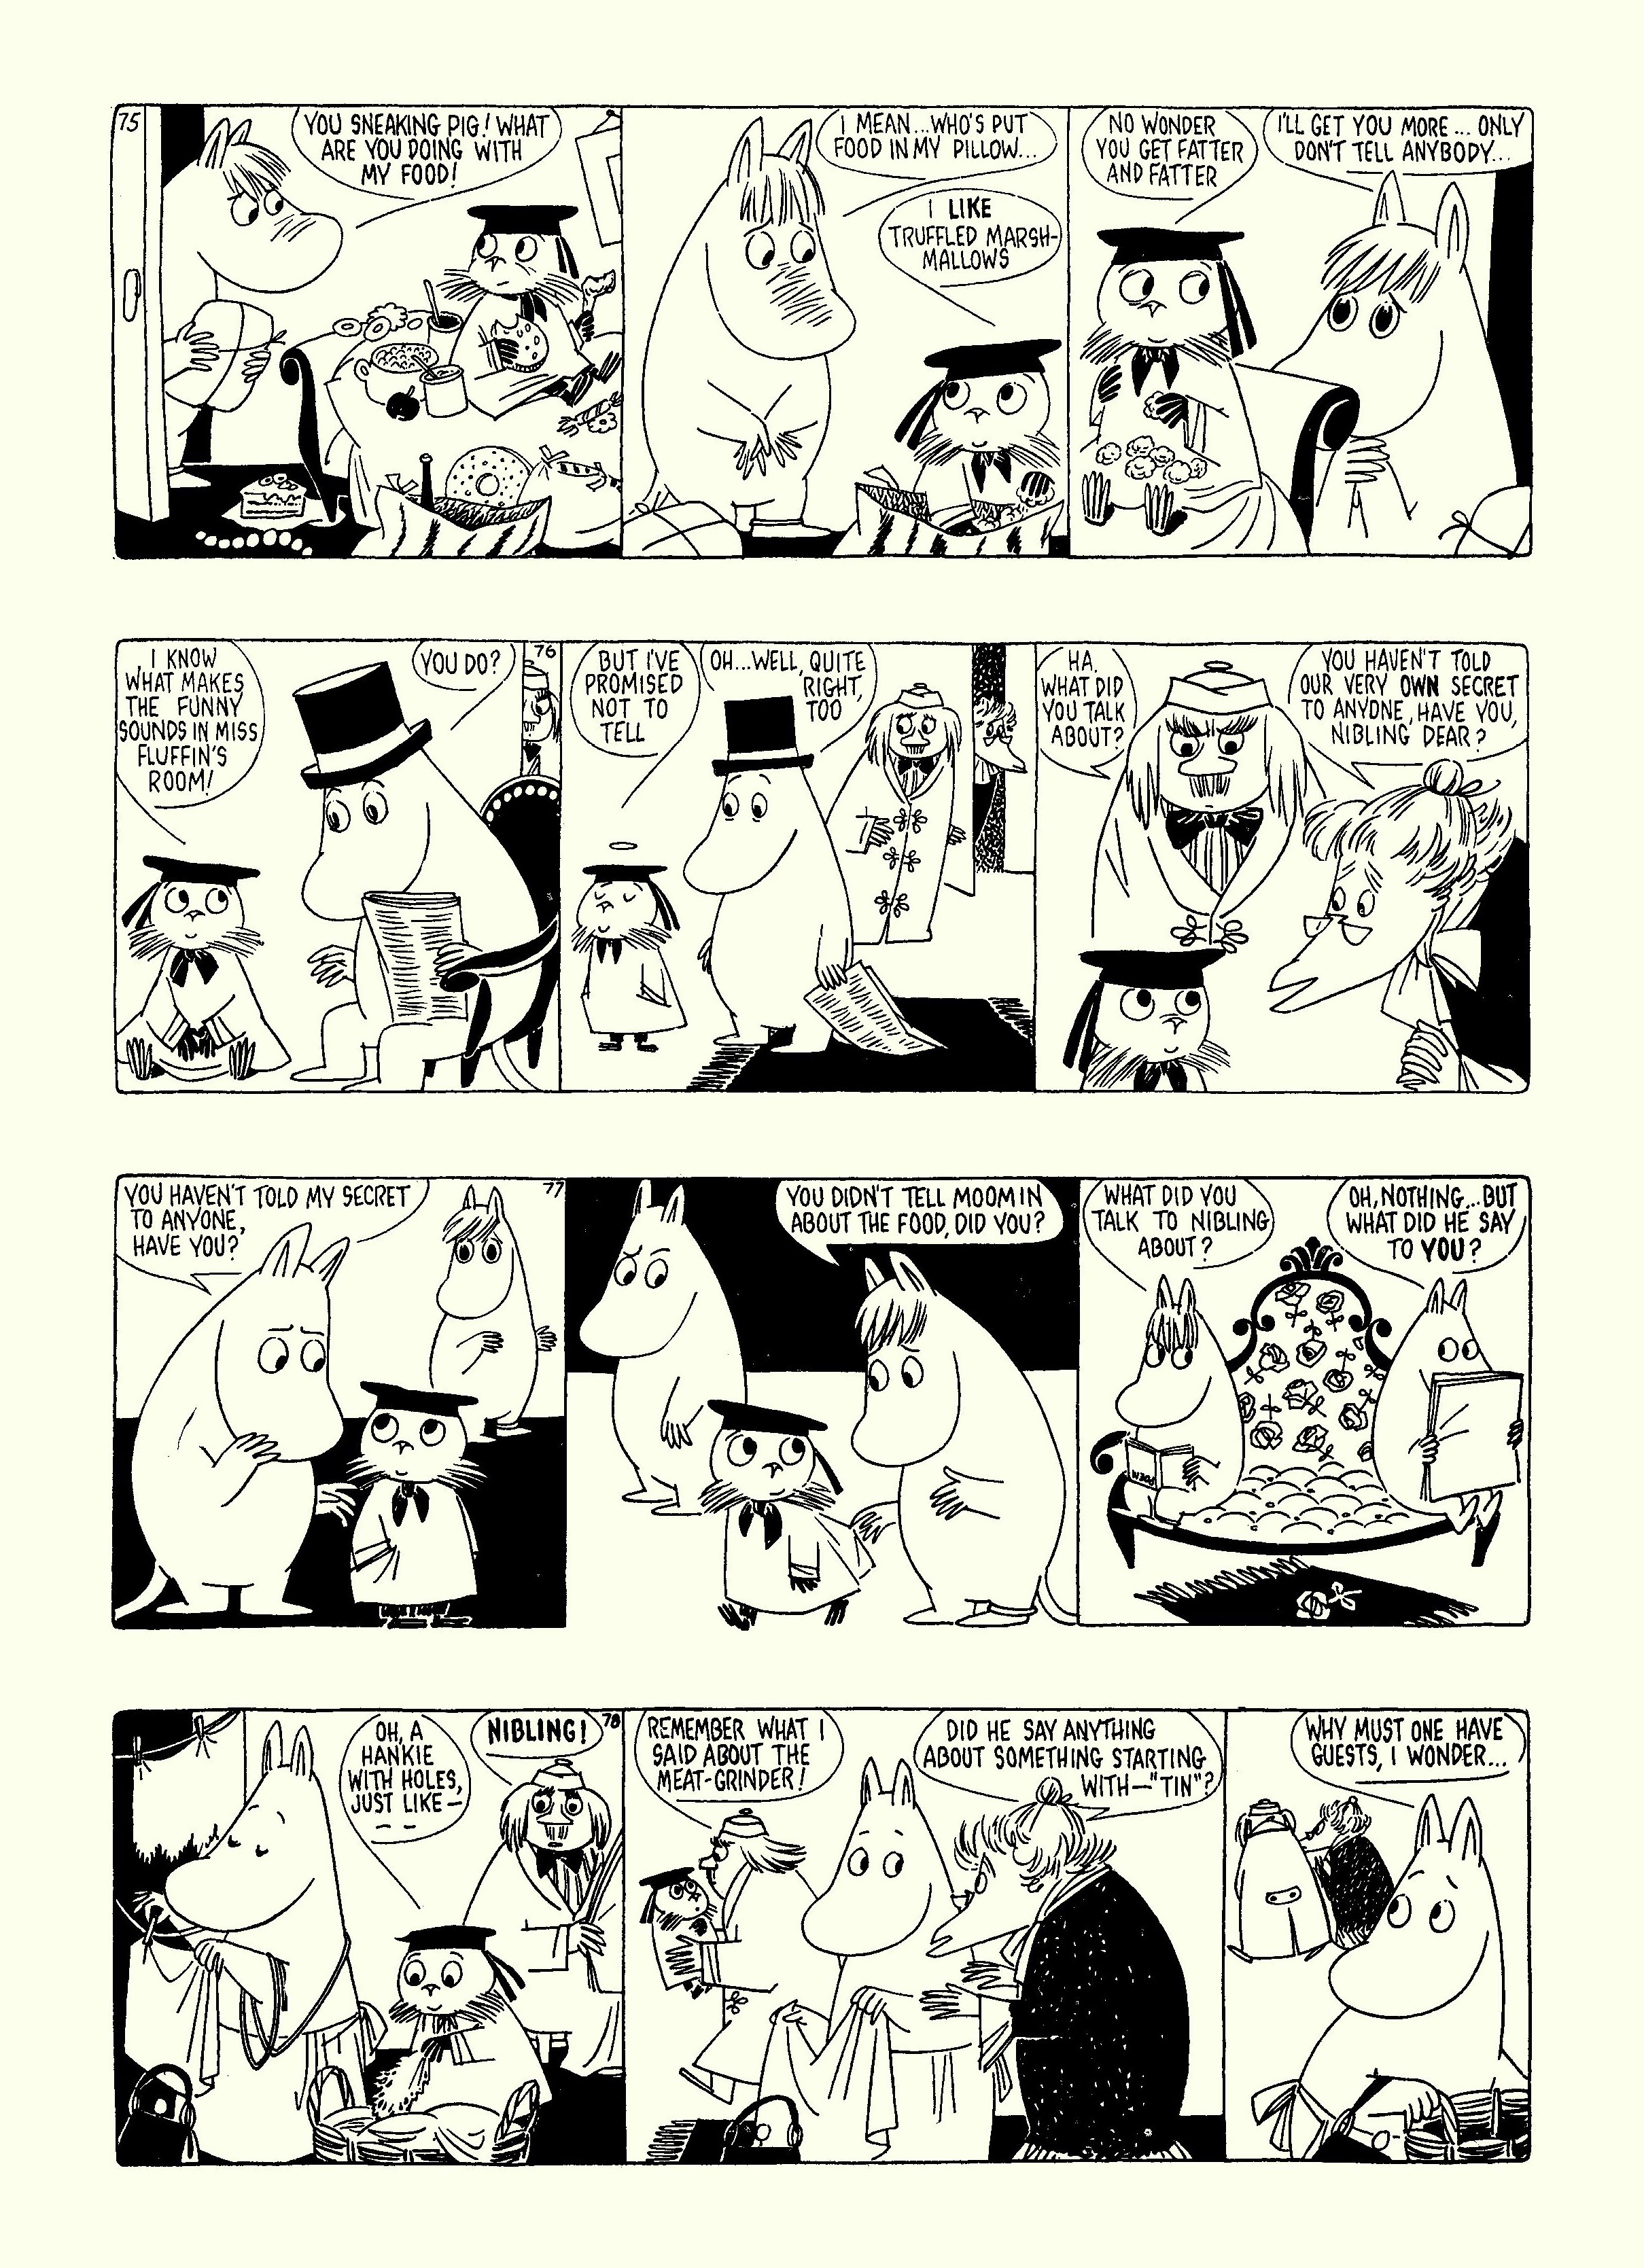 Read online Moomin: The Complete Tove Jansson Comic Strip comic -  Issue # TPB 5 - 25